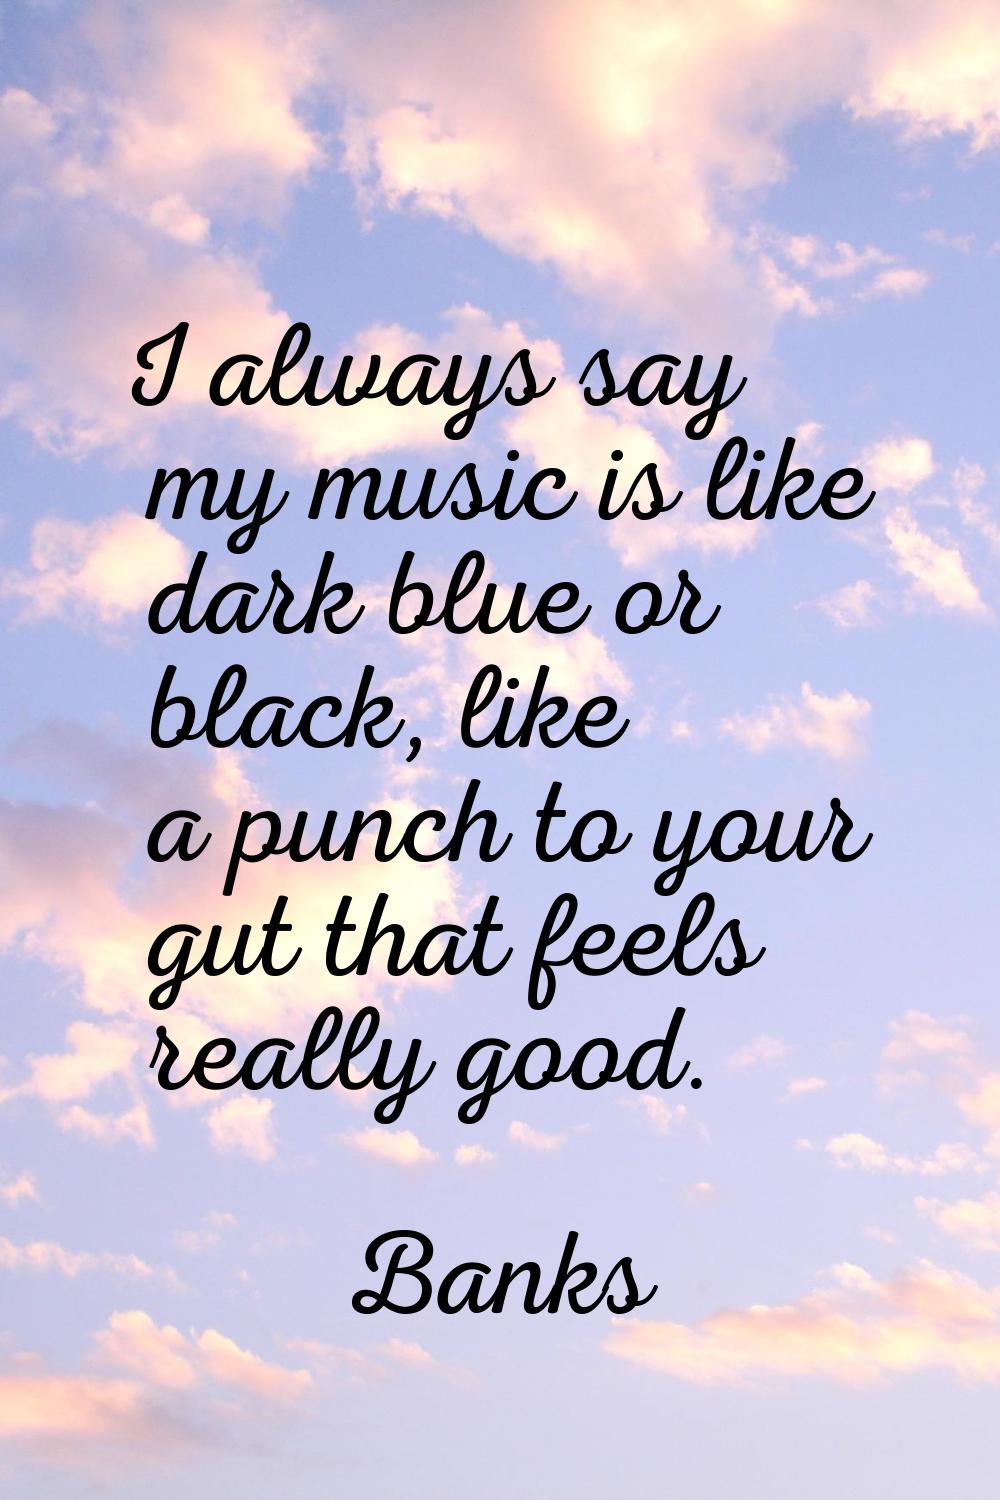 I always say my music is like dark blue or black, like a punch to your gut that feels really good.